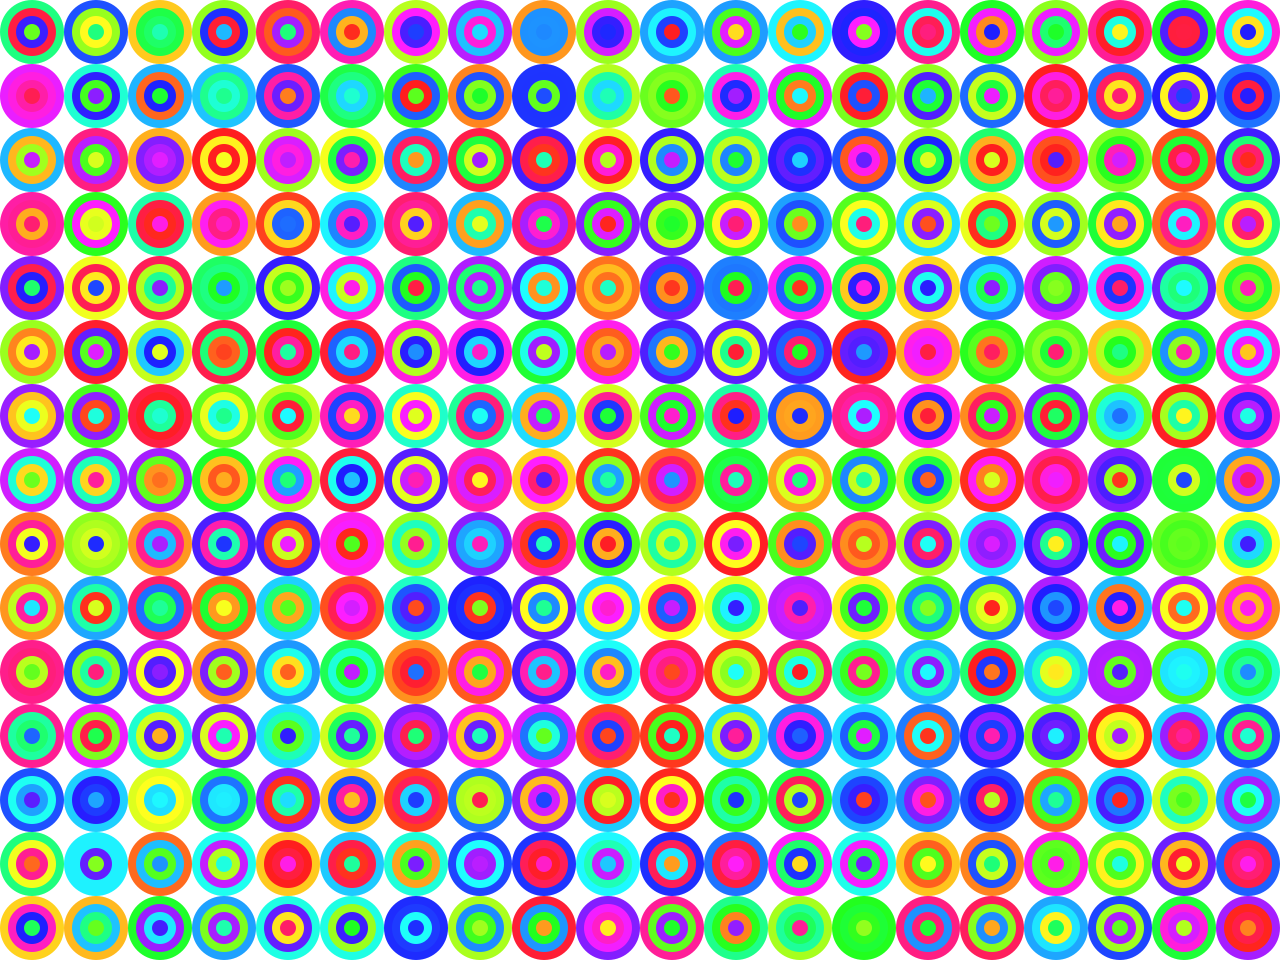 File:Color circles 15 x 20.svg - Wikimedia Commons